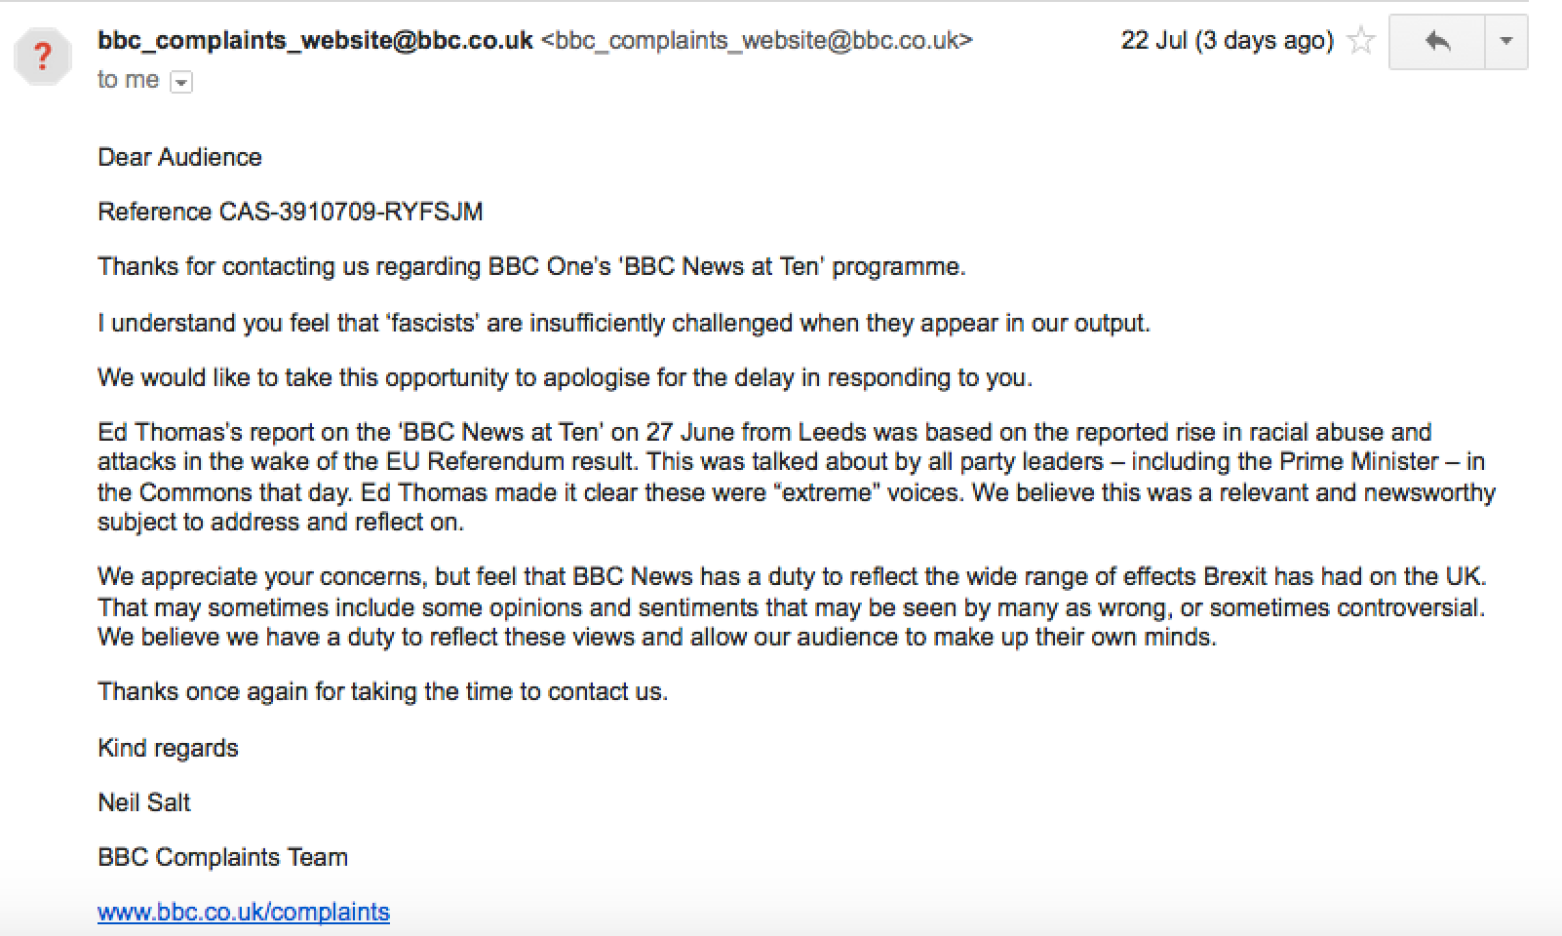 BBC complaints reply, recieved 22 July 2016